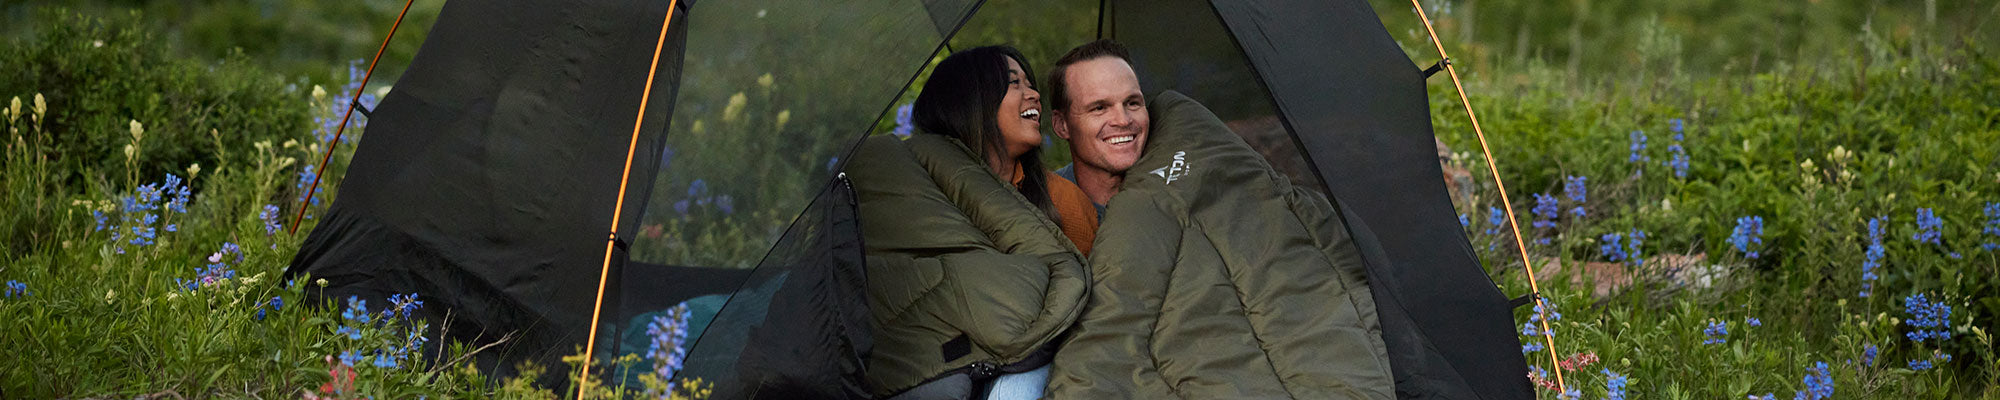 A couple laughs together by a campfire while snuggled up in a TETON Sports Evergreen Mammoth Sleeping Bag.